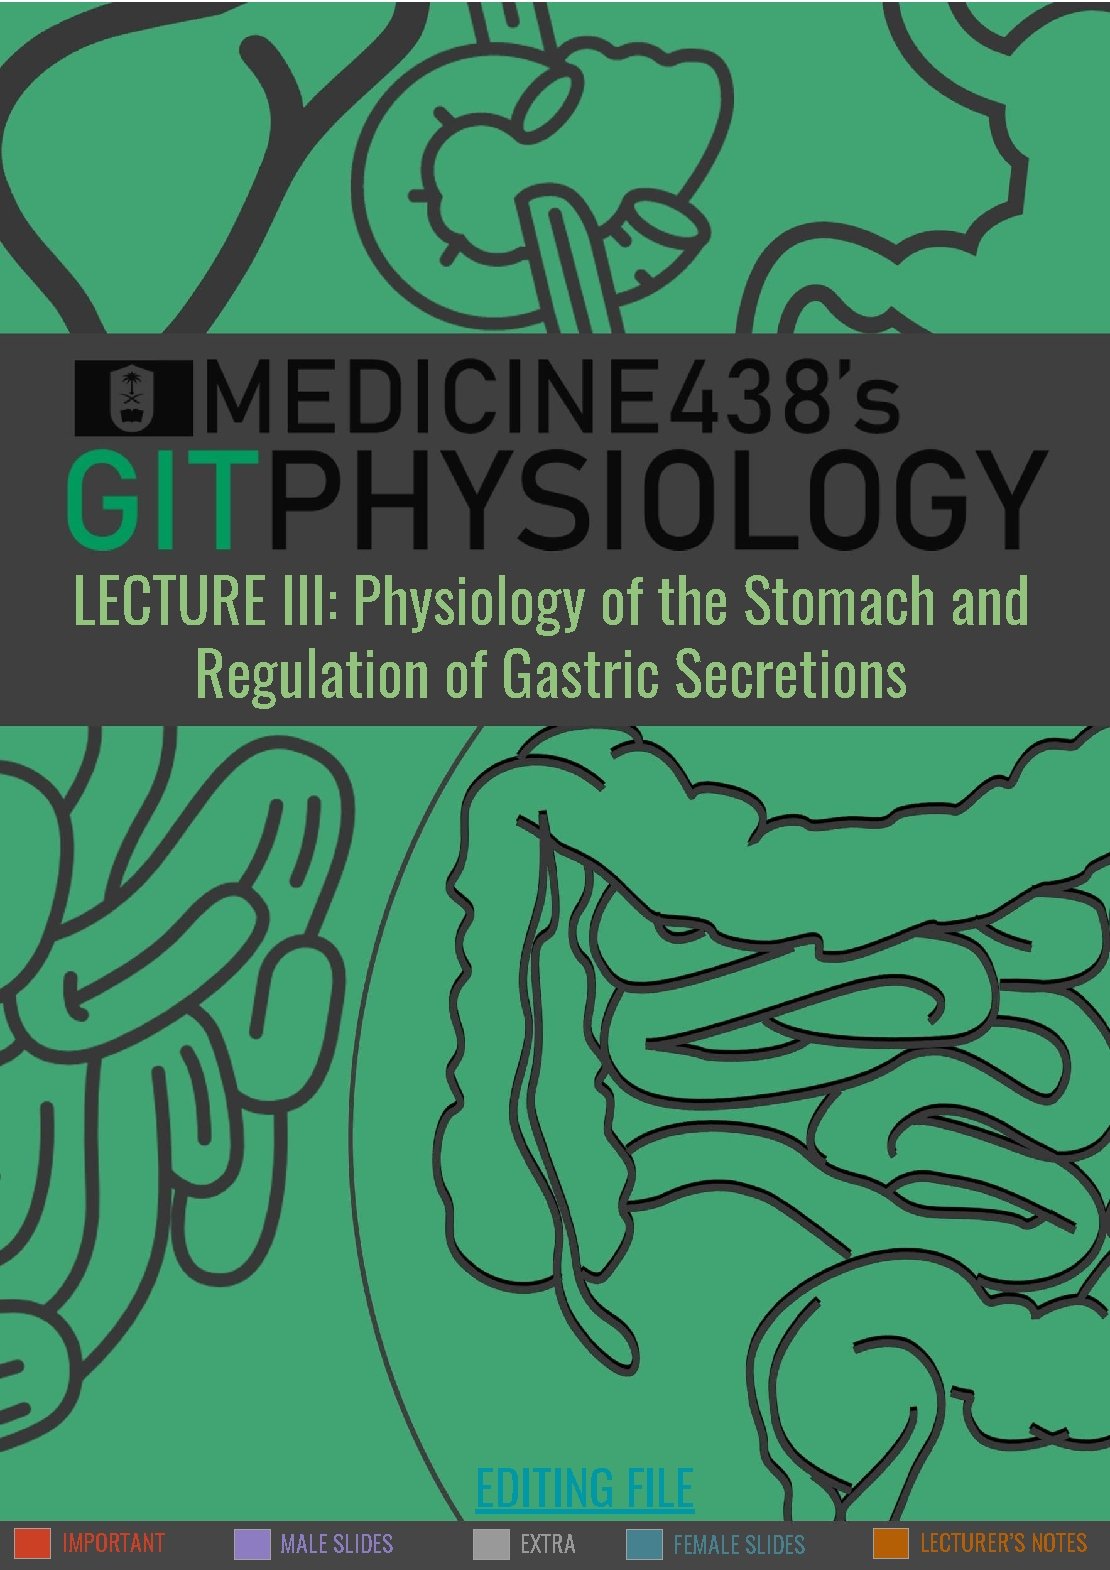 LECTURE III: Physiology of the Stomach and Regulation of Gastric Secretions IMPORTANT MALE SLIDES